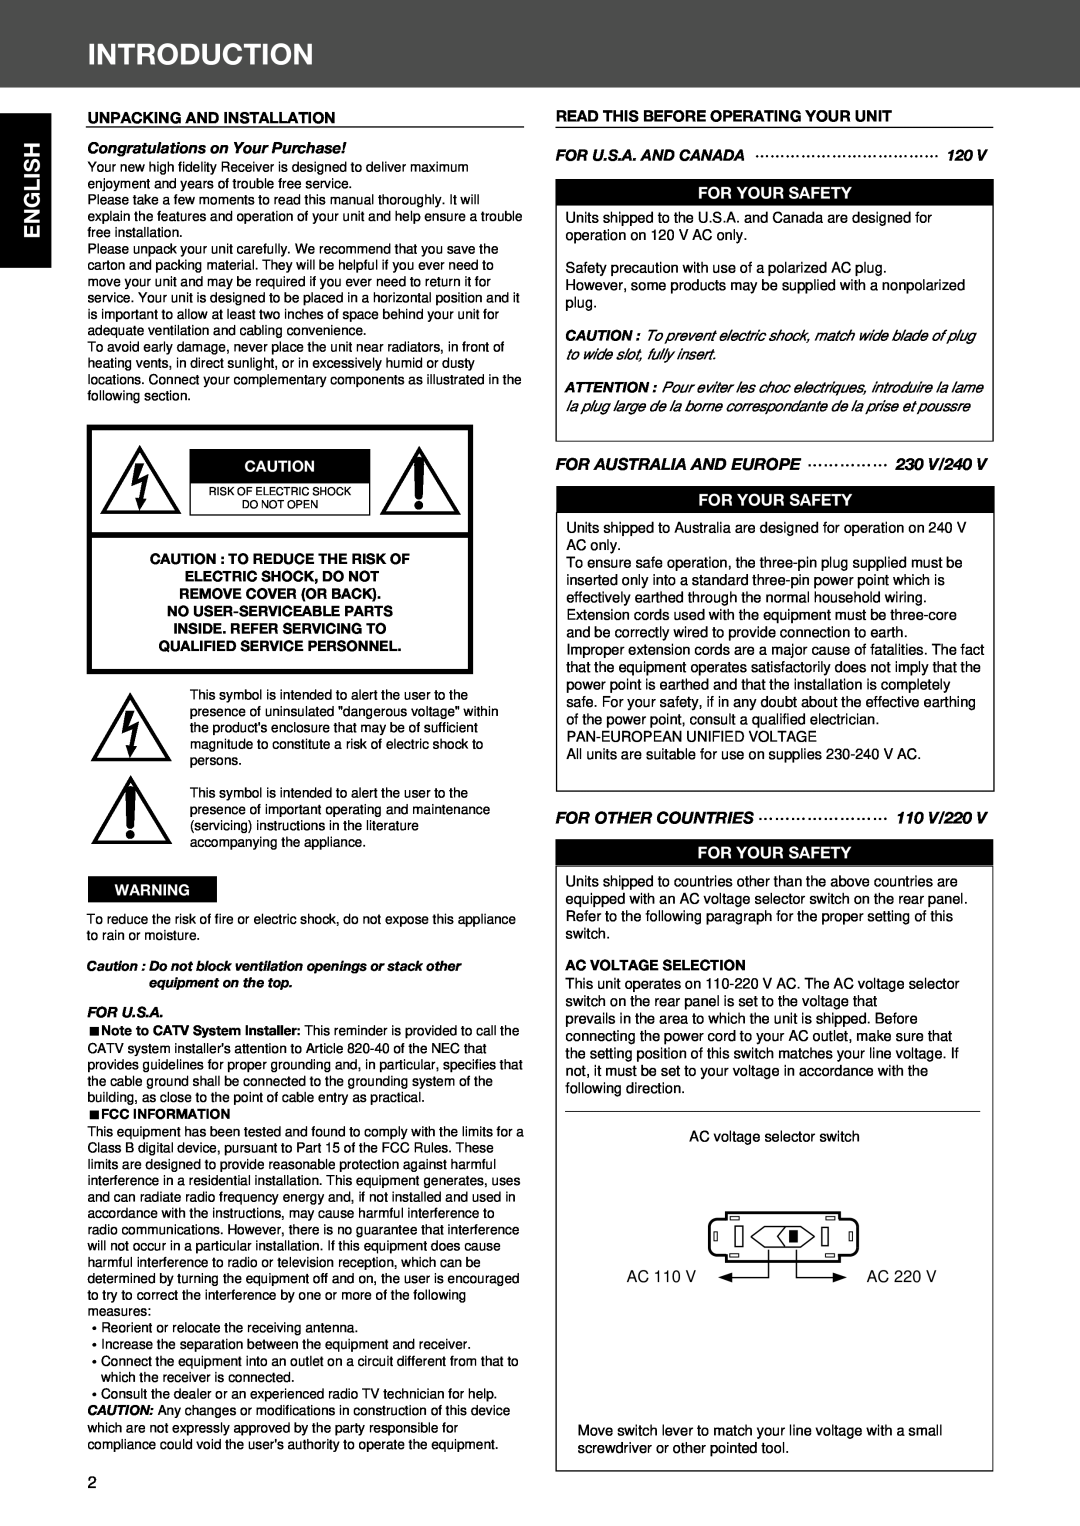 Sherwood RV-4060R manual Introduction, English, For Your Safety, For Australia And Europe, For Other Countries, For U.S.A 